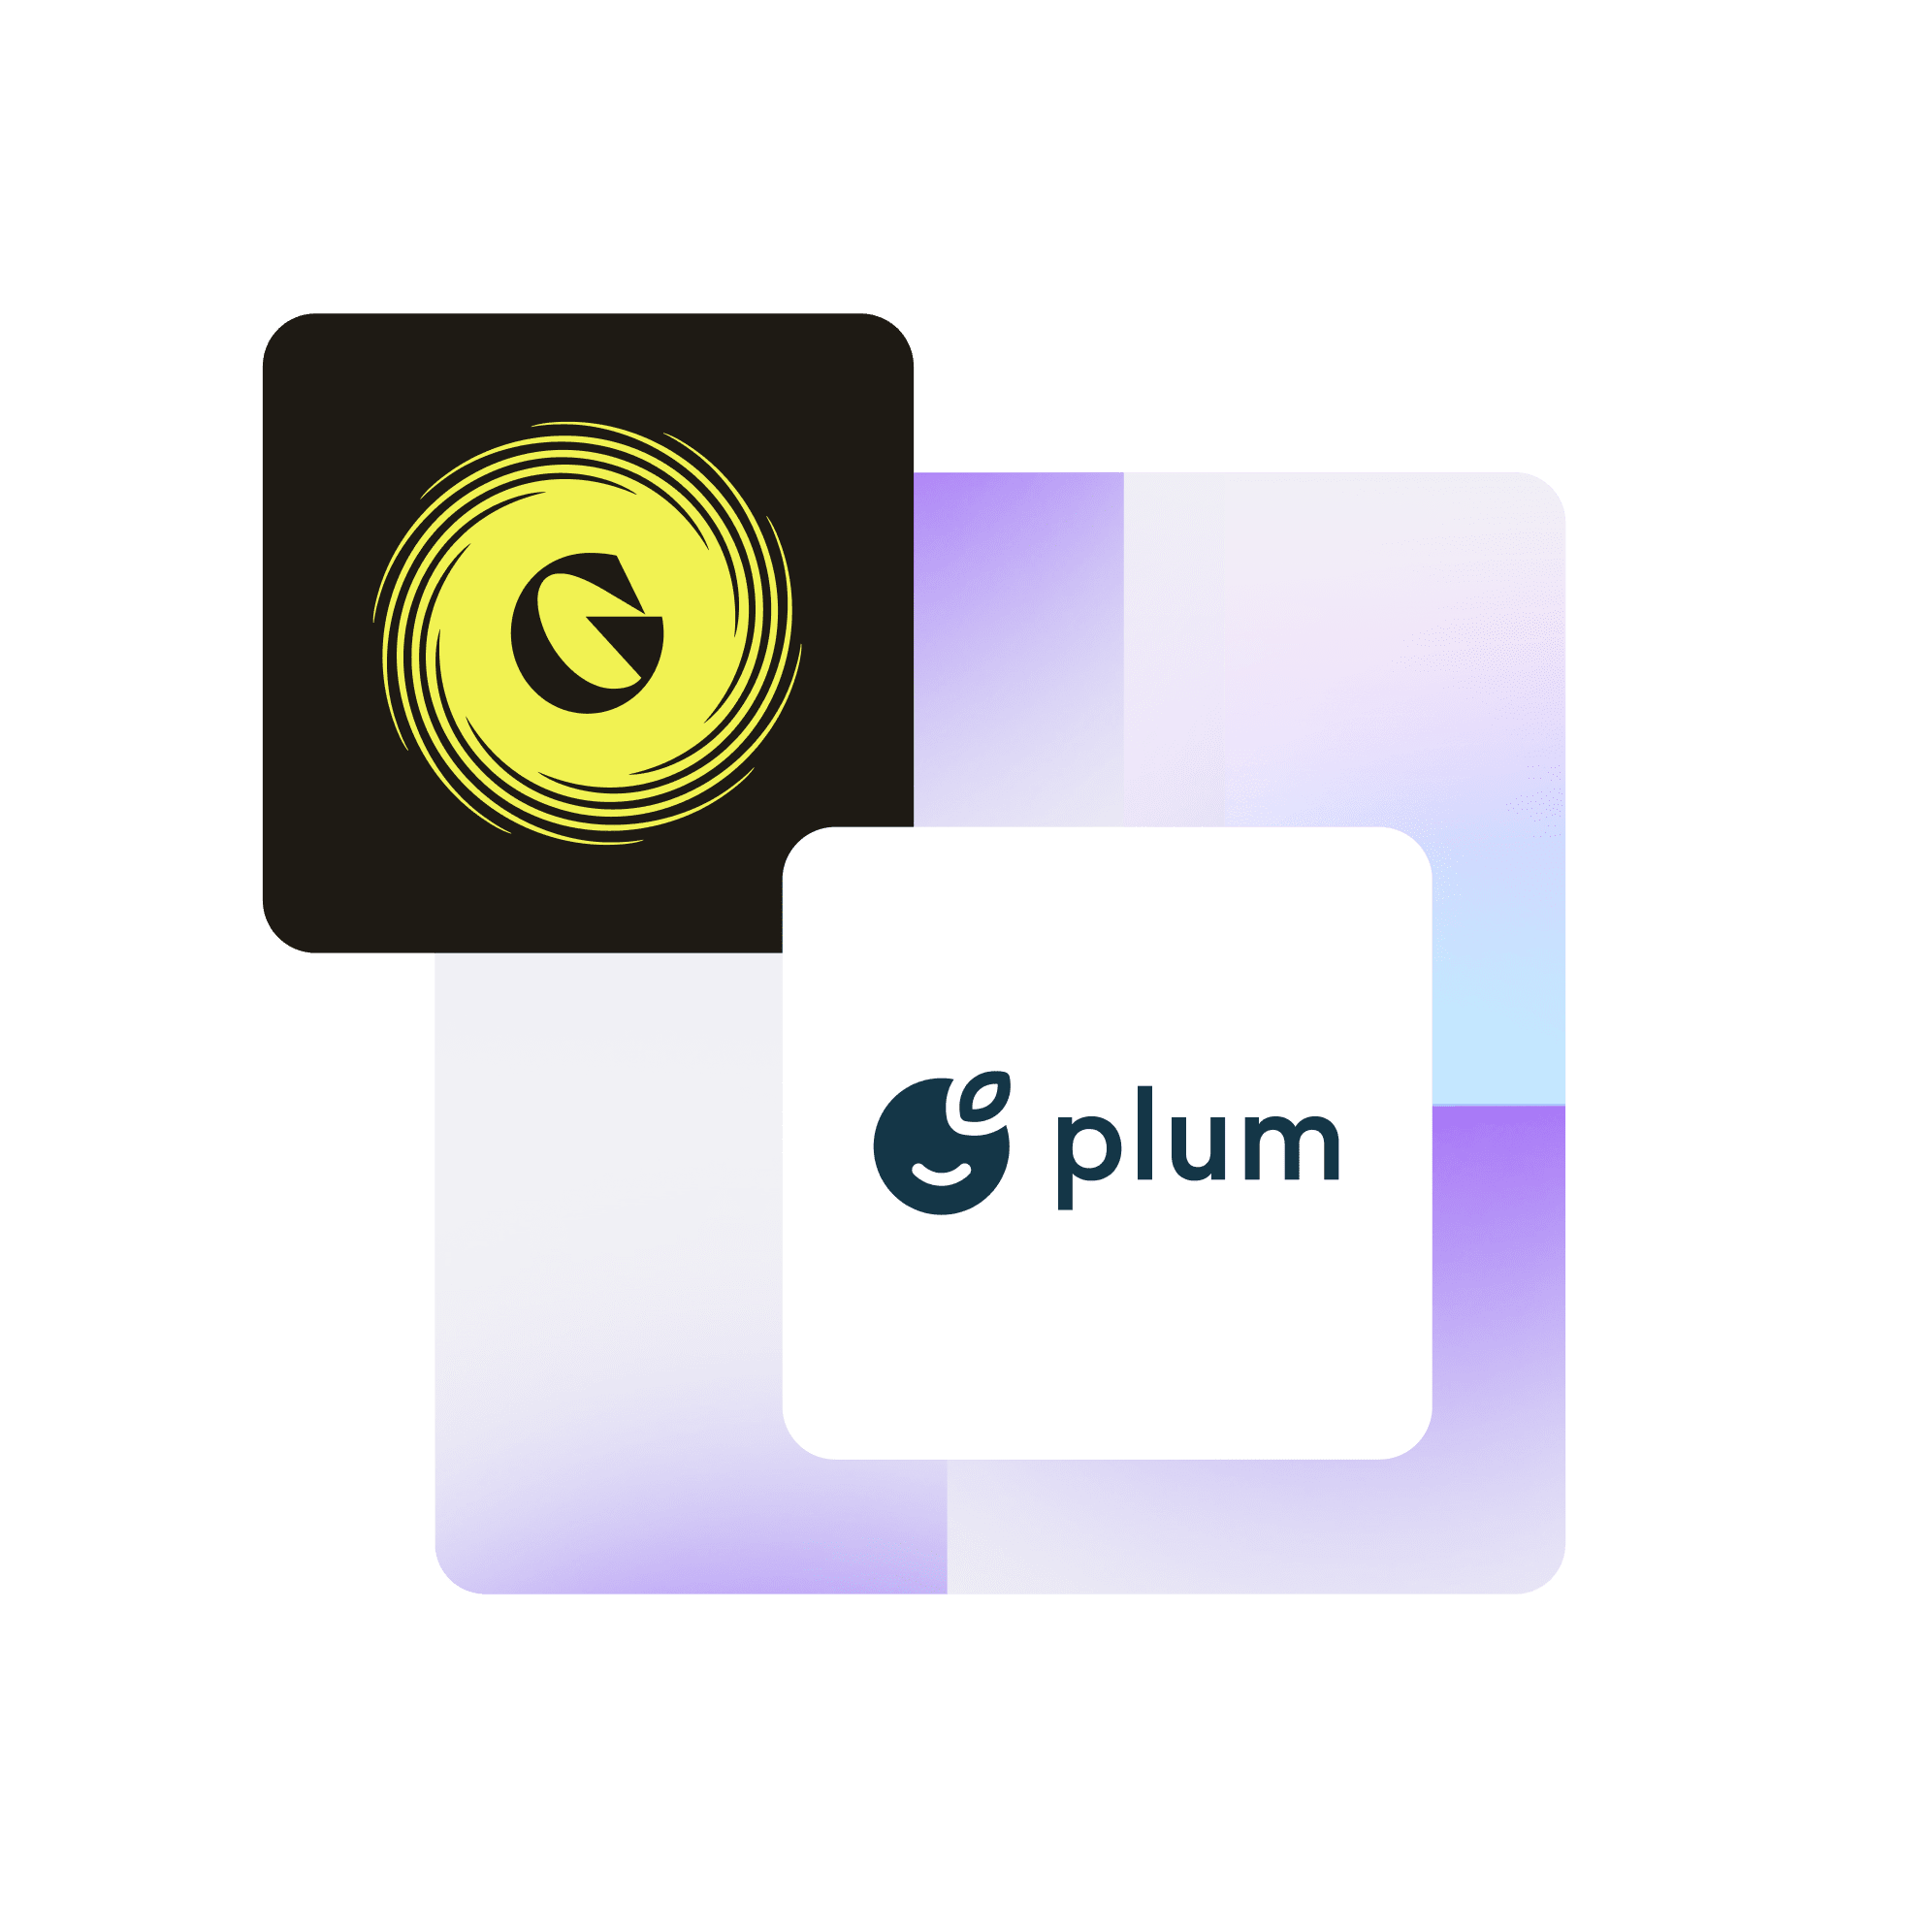 “The impact was immediate — we’ve seen payment failures drop from 3.6% to 0.48% in three months. This 7.5x improvement in failed payments collected is huge for a fast-growing company like Plum — and helps ensure a seamless experience for our customers.”